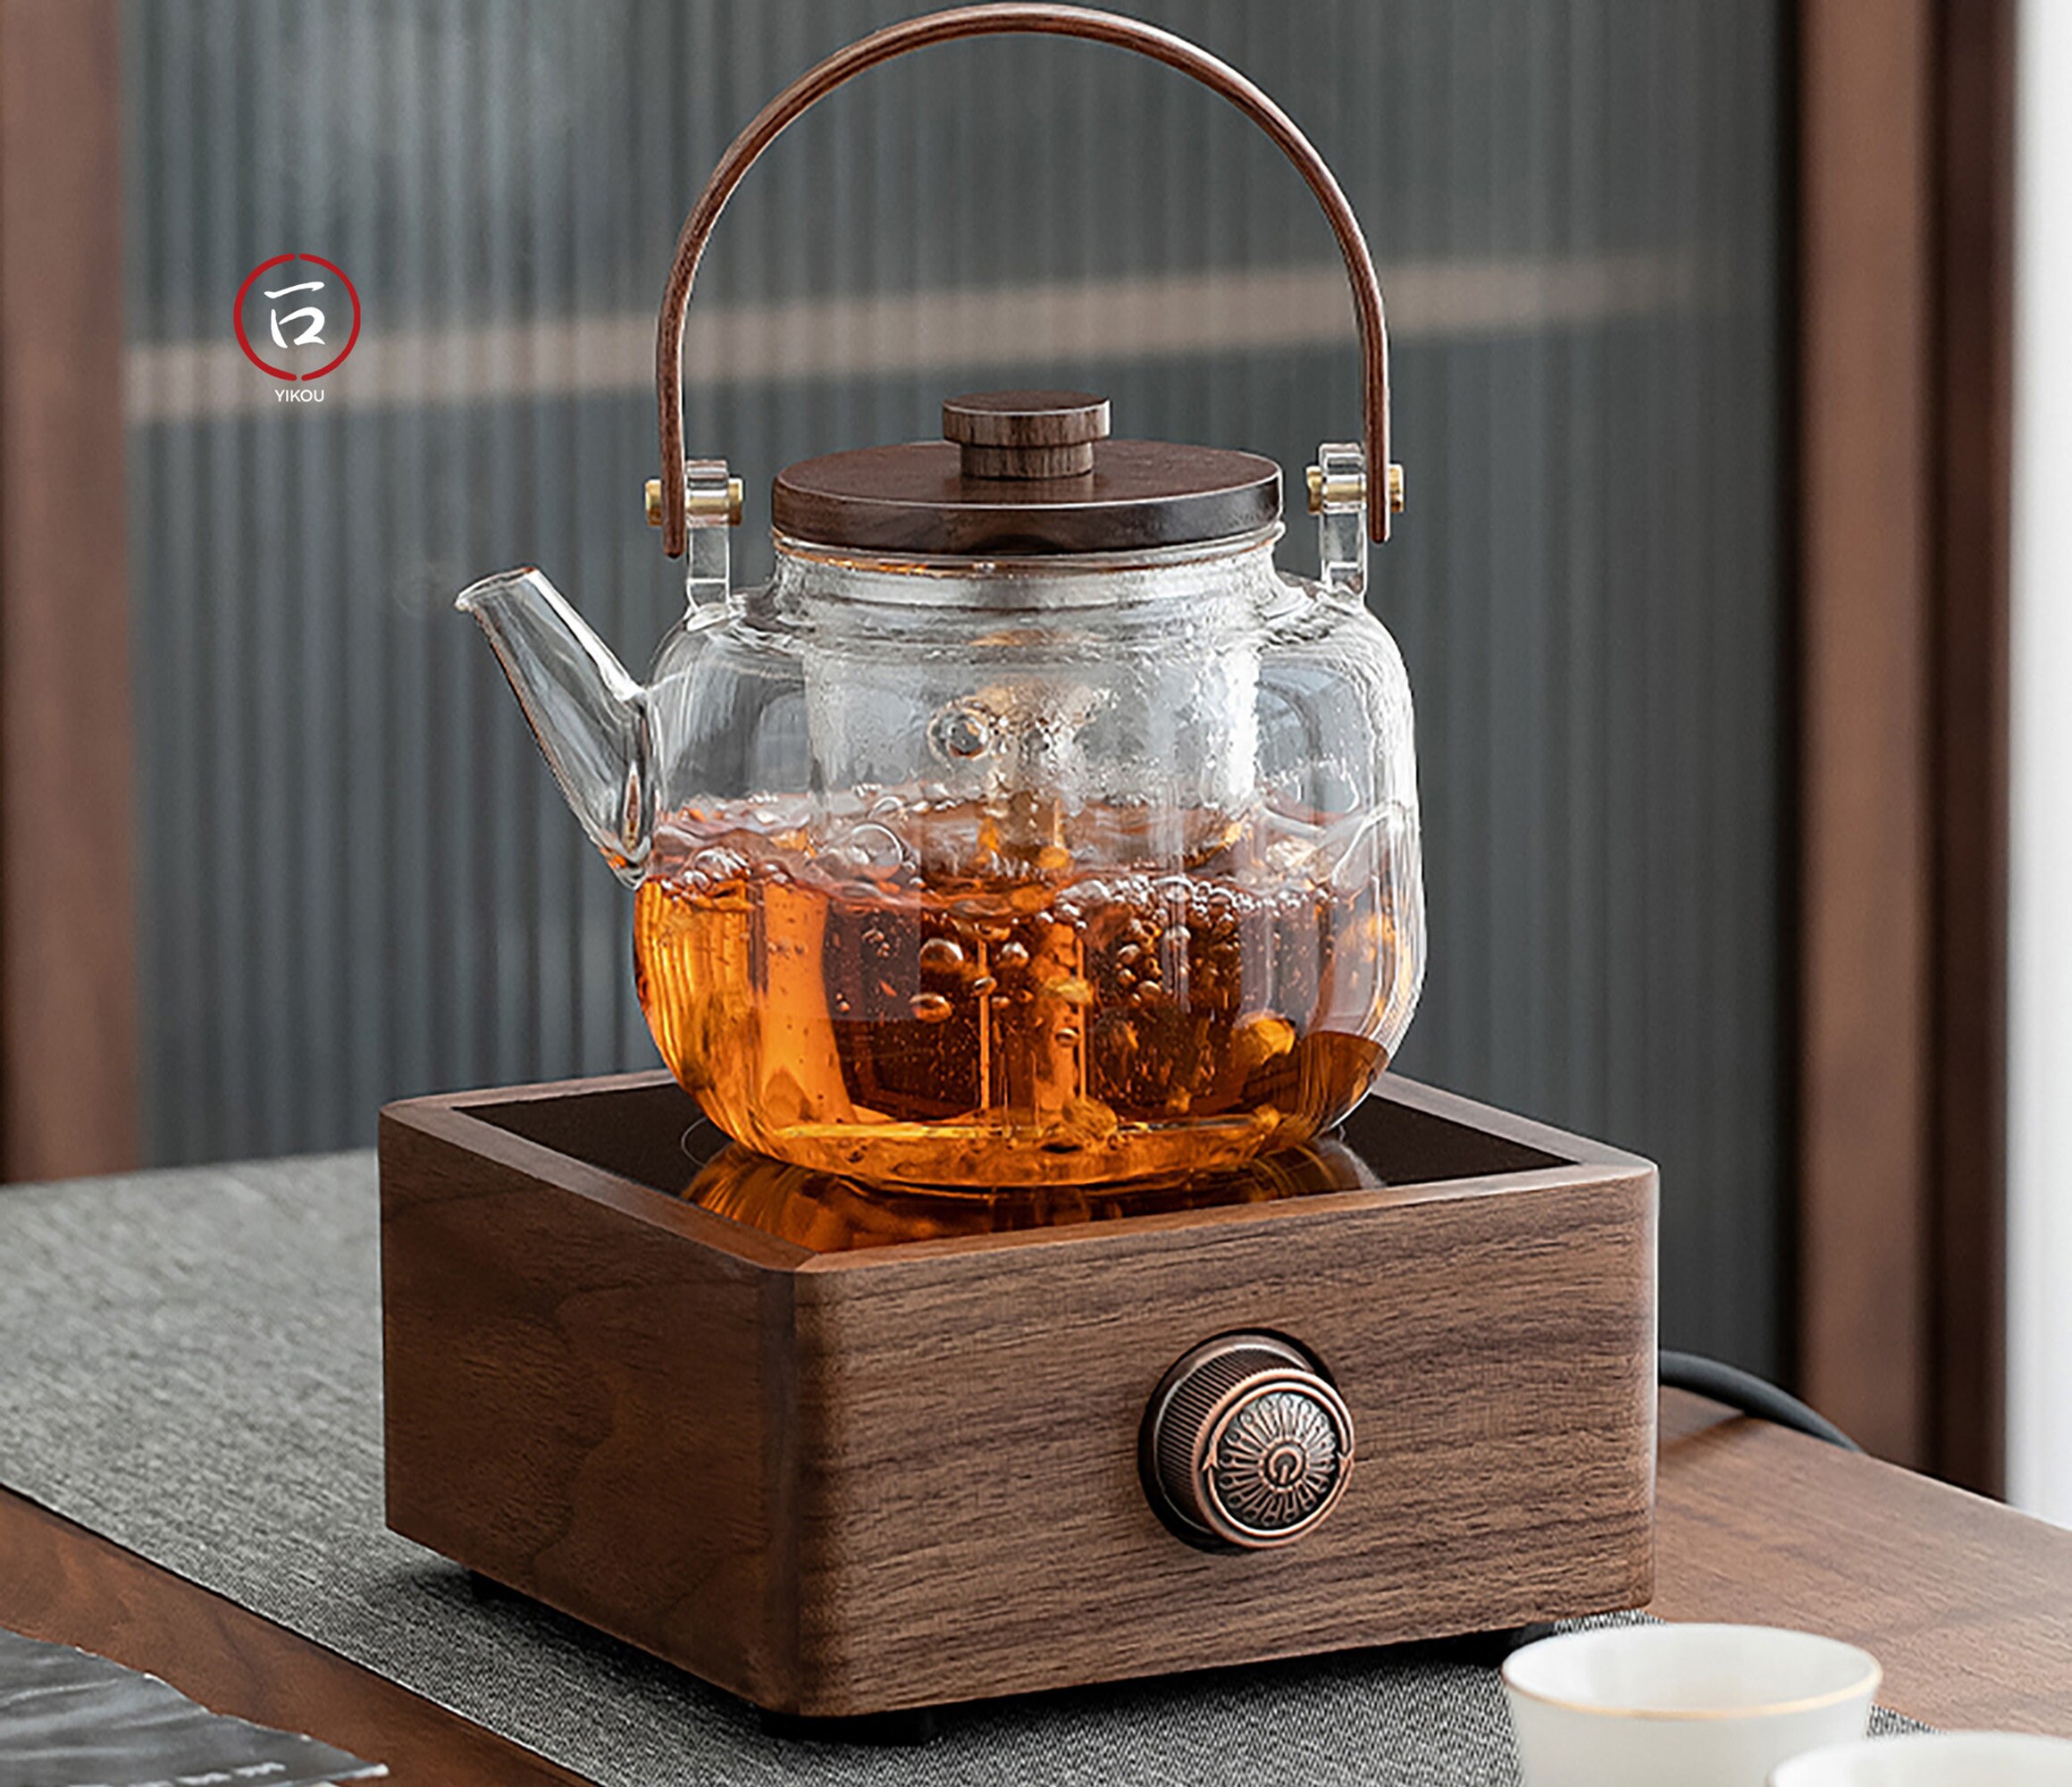 Universal Teapot Warmer - Beautiful Aluminum alloy Warmers|Tea Pot Heater  in Frosted Gold with Ornate Design.